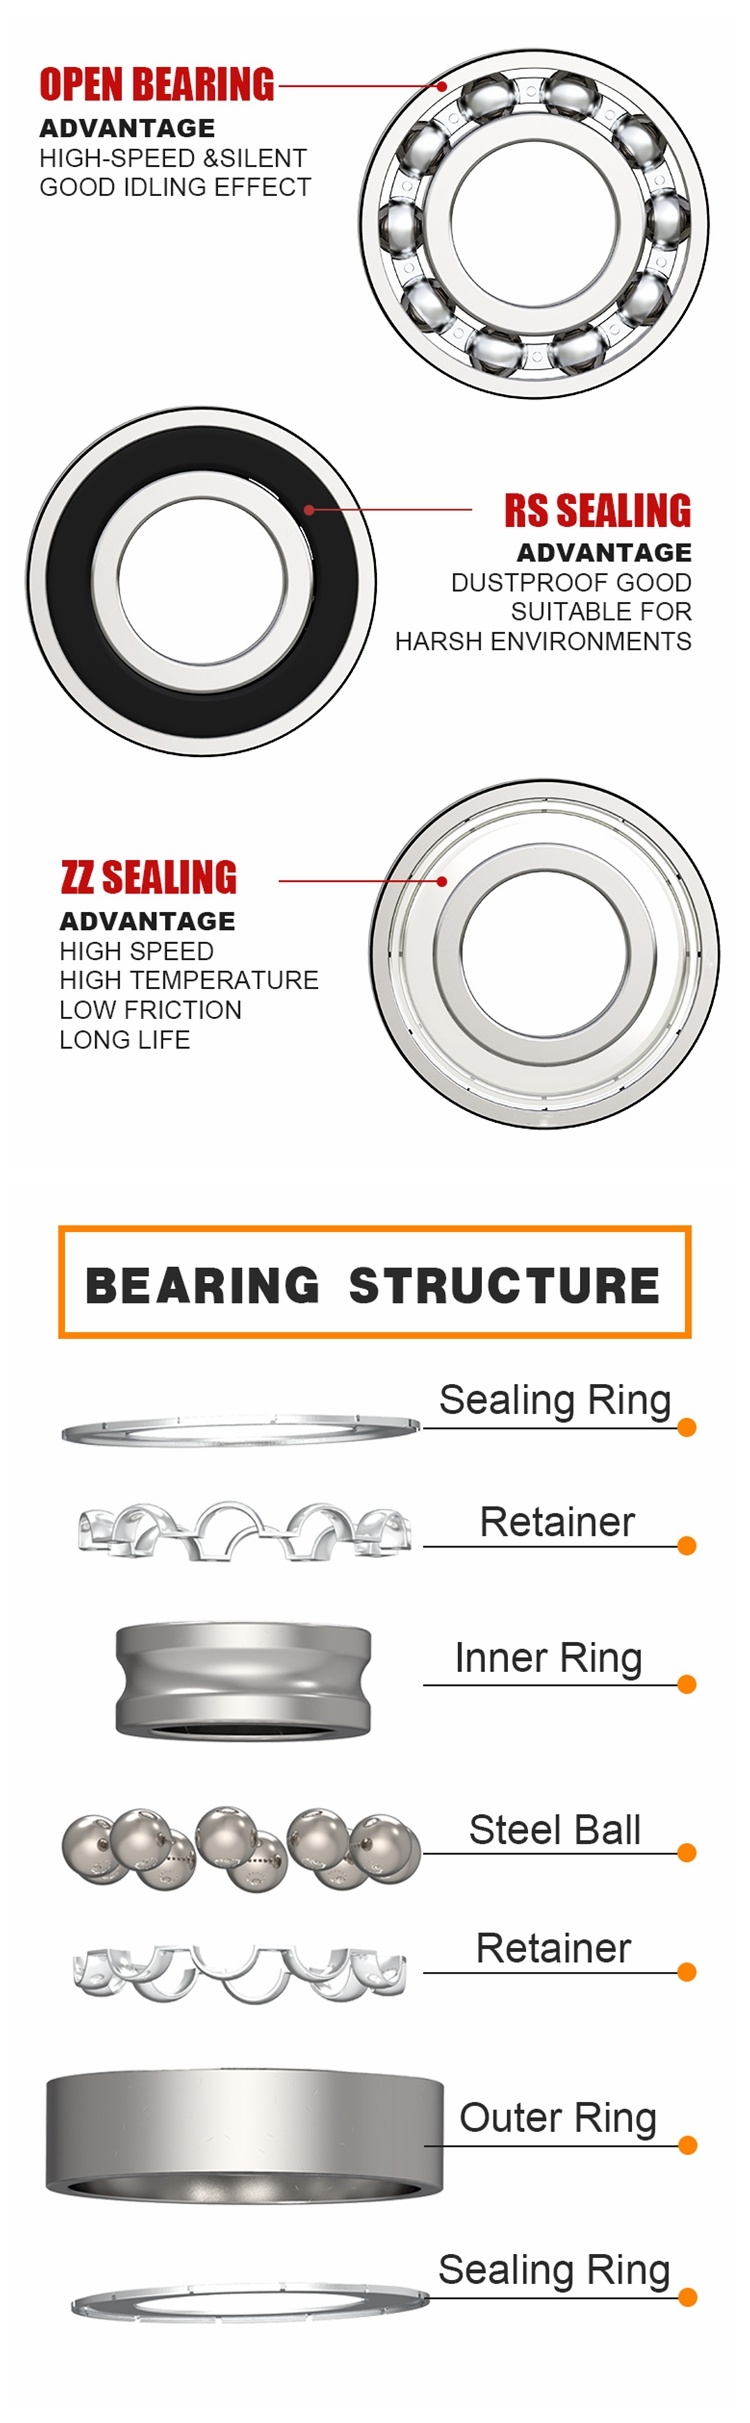 P5 Level Motorcycle Bearing Steel Cover 6928 Zz Ball Bearings